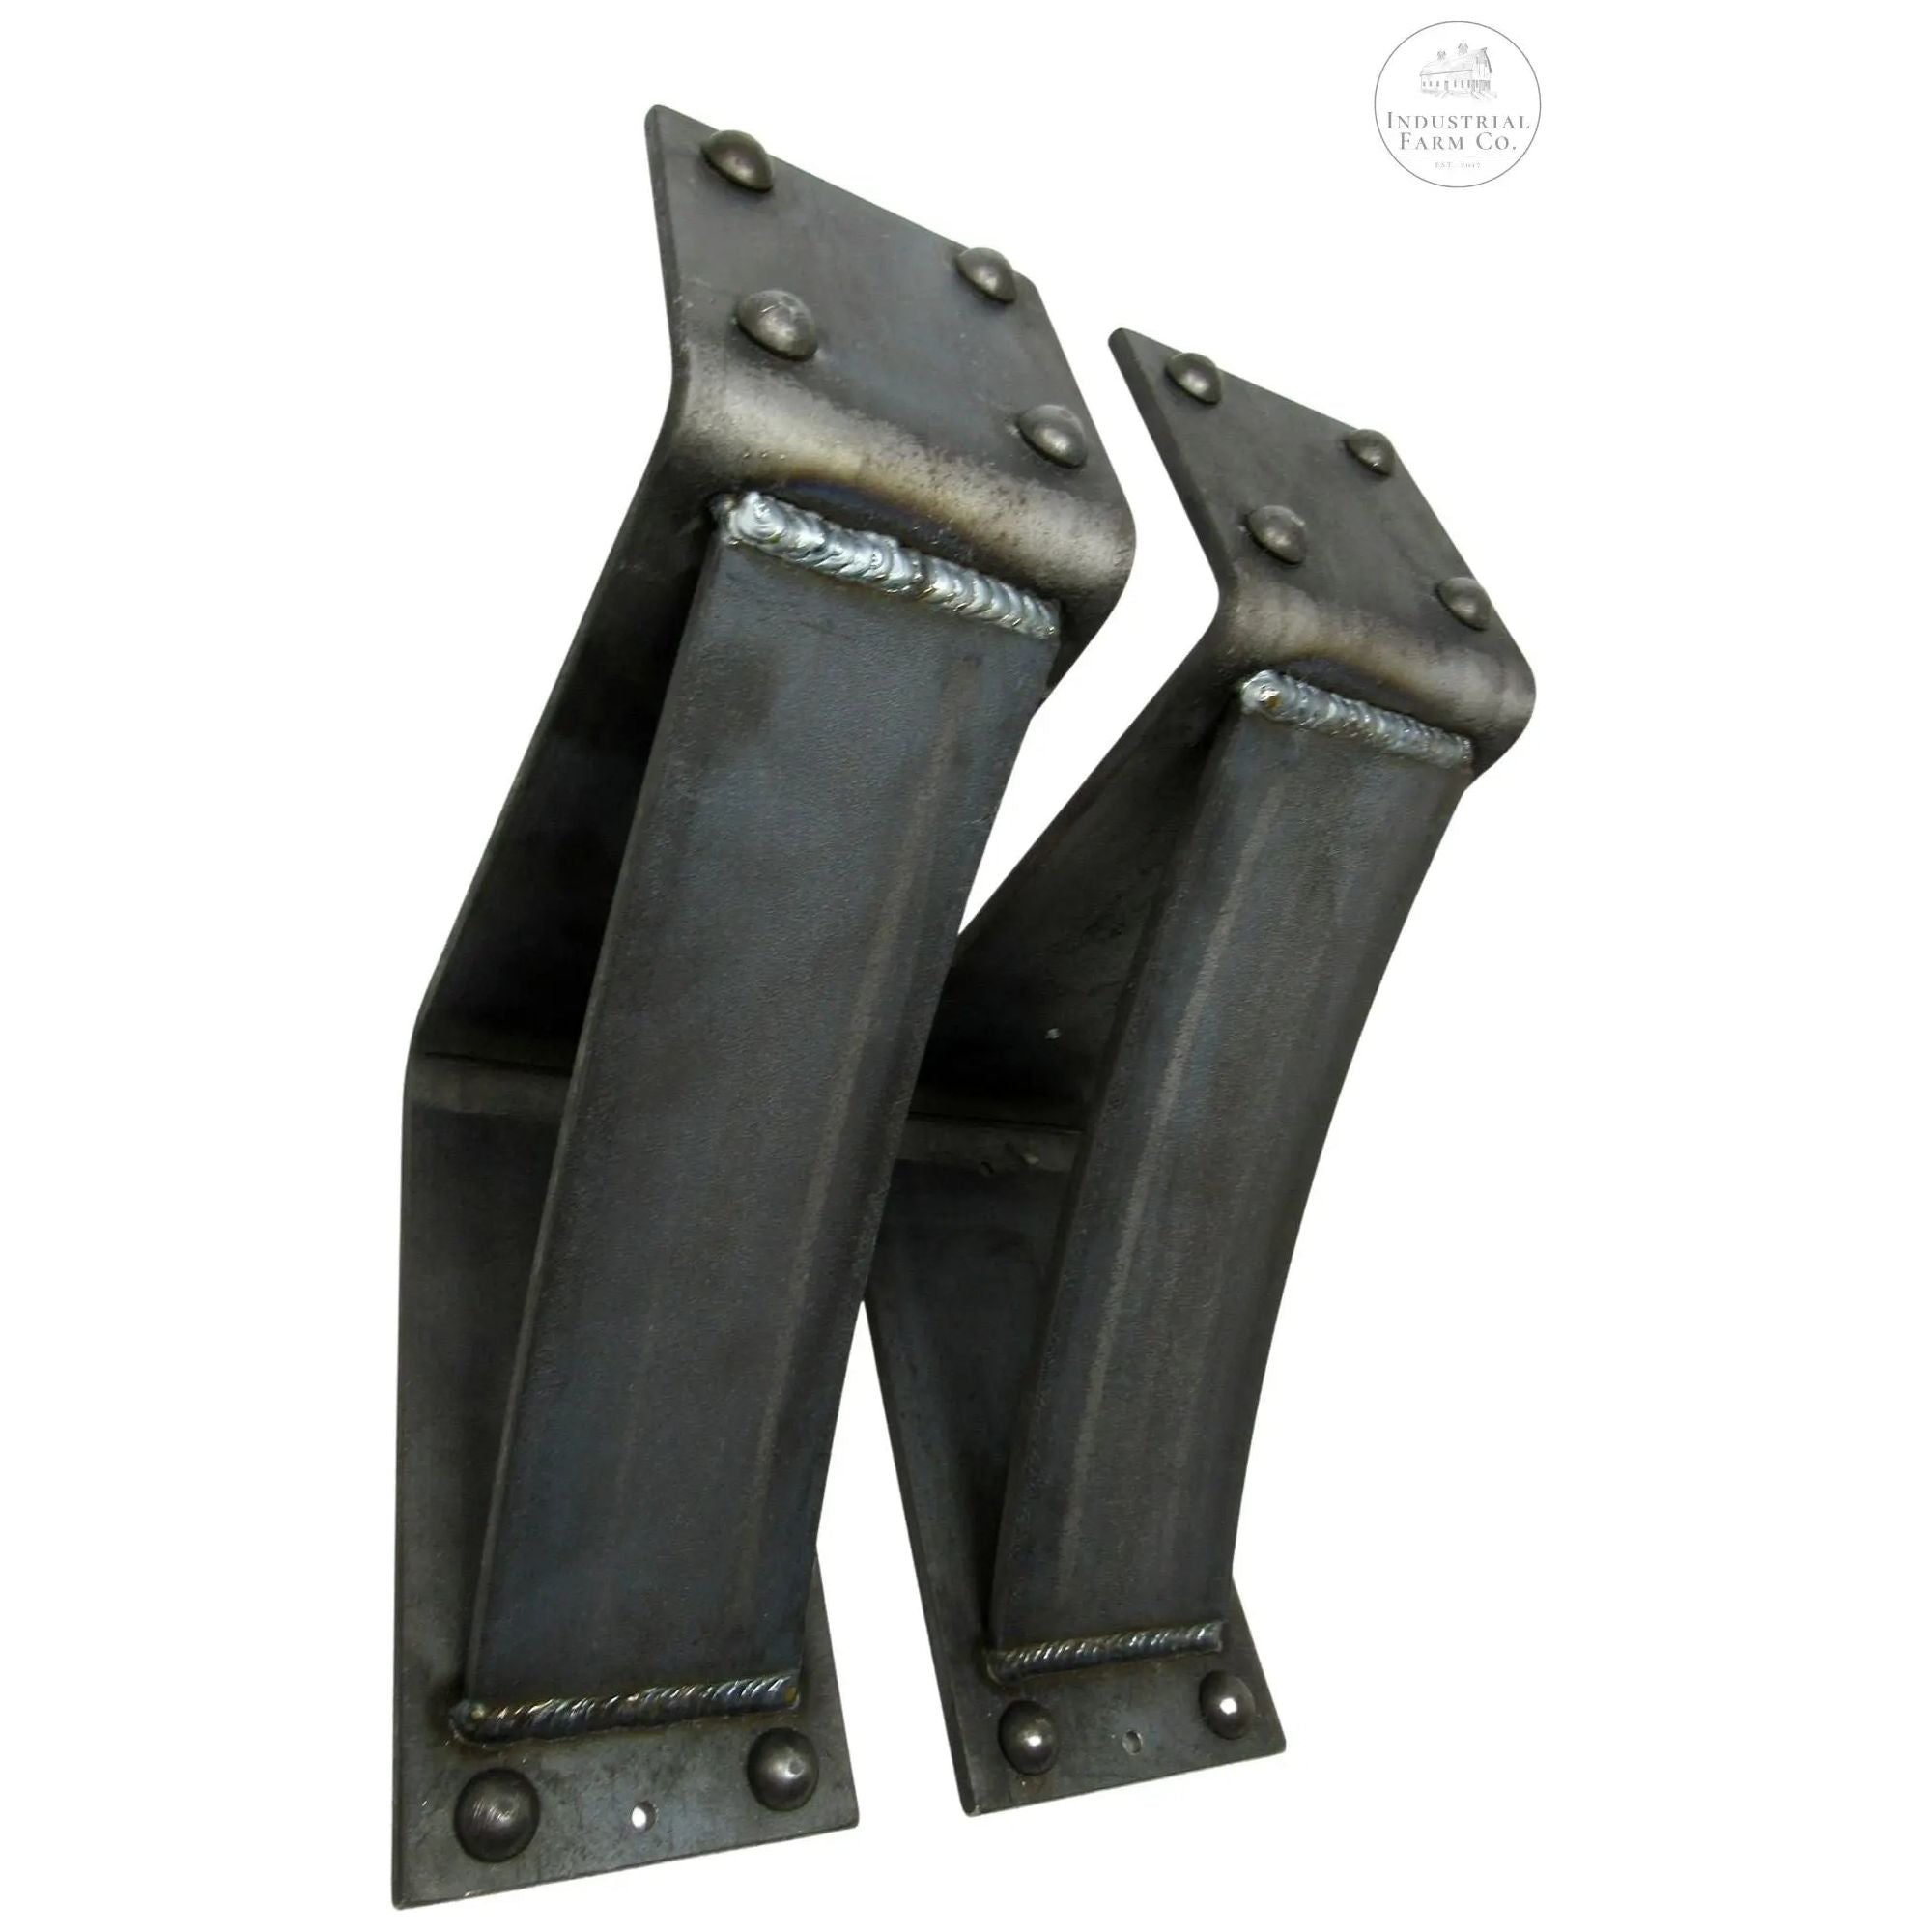 The Clermont Farmhouse Shelf Mantle Support Brackets/Corbels 6.5" Depth x 6" Wall Mount Length.5 Finish Raw - Uncoated Metal | Industrial Farm Co